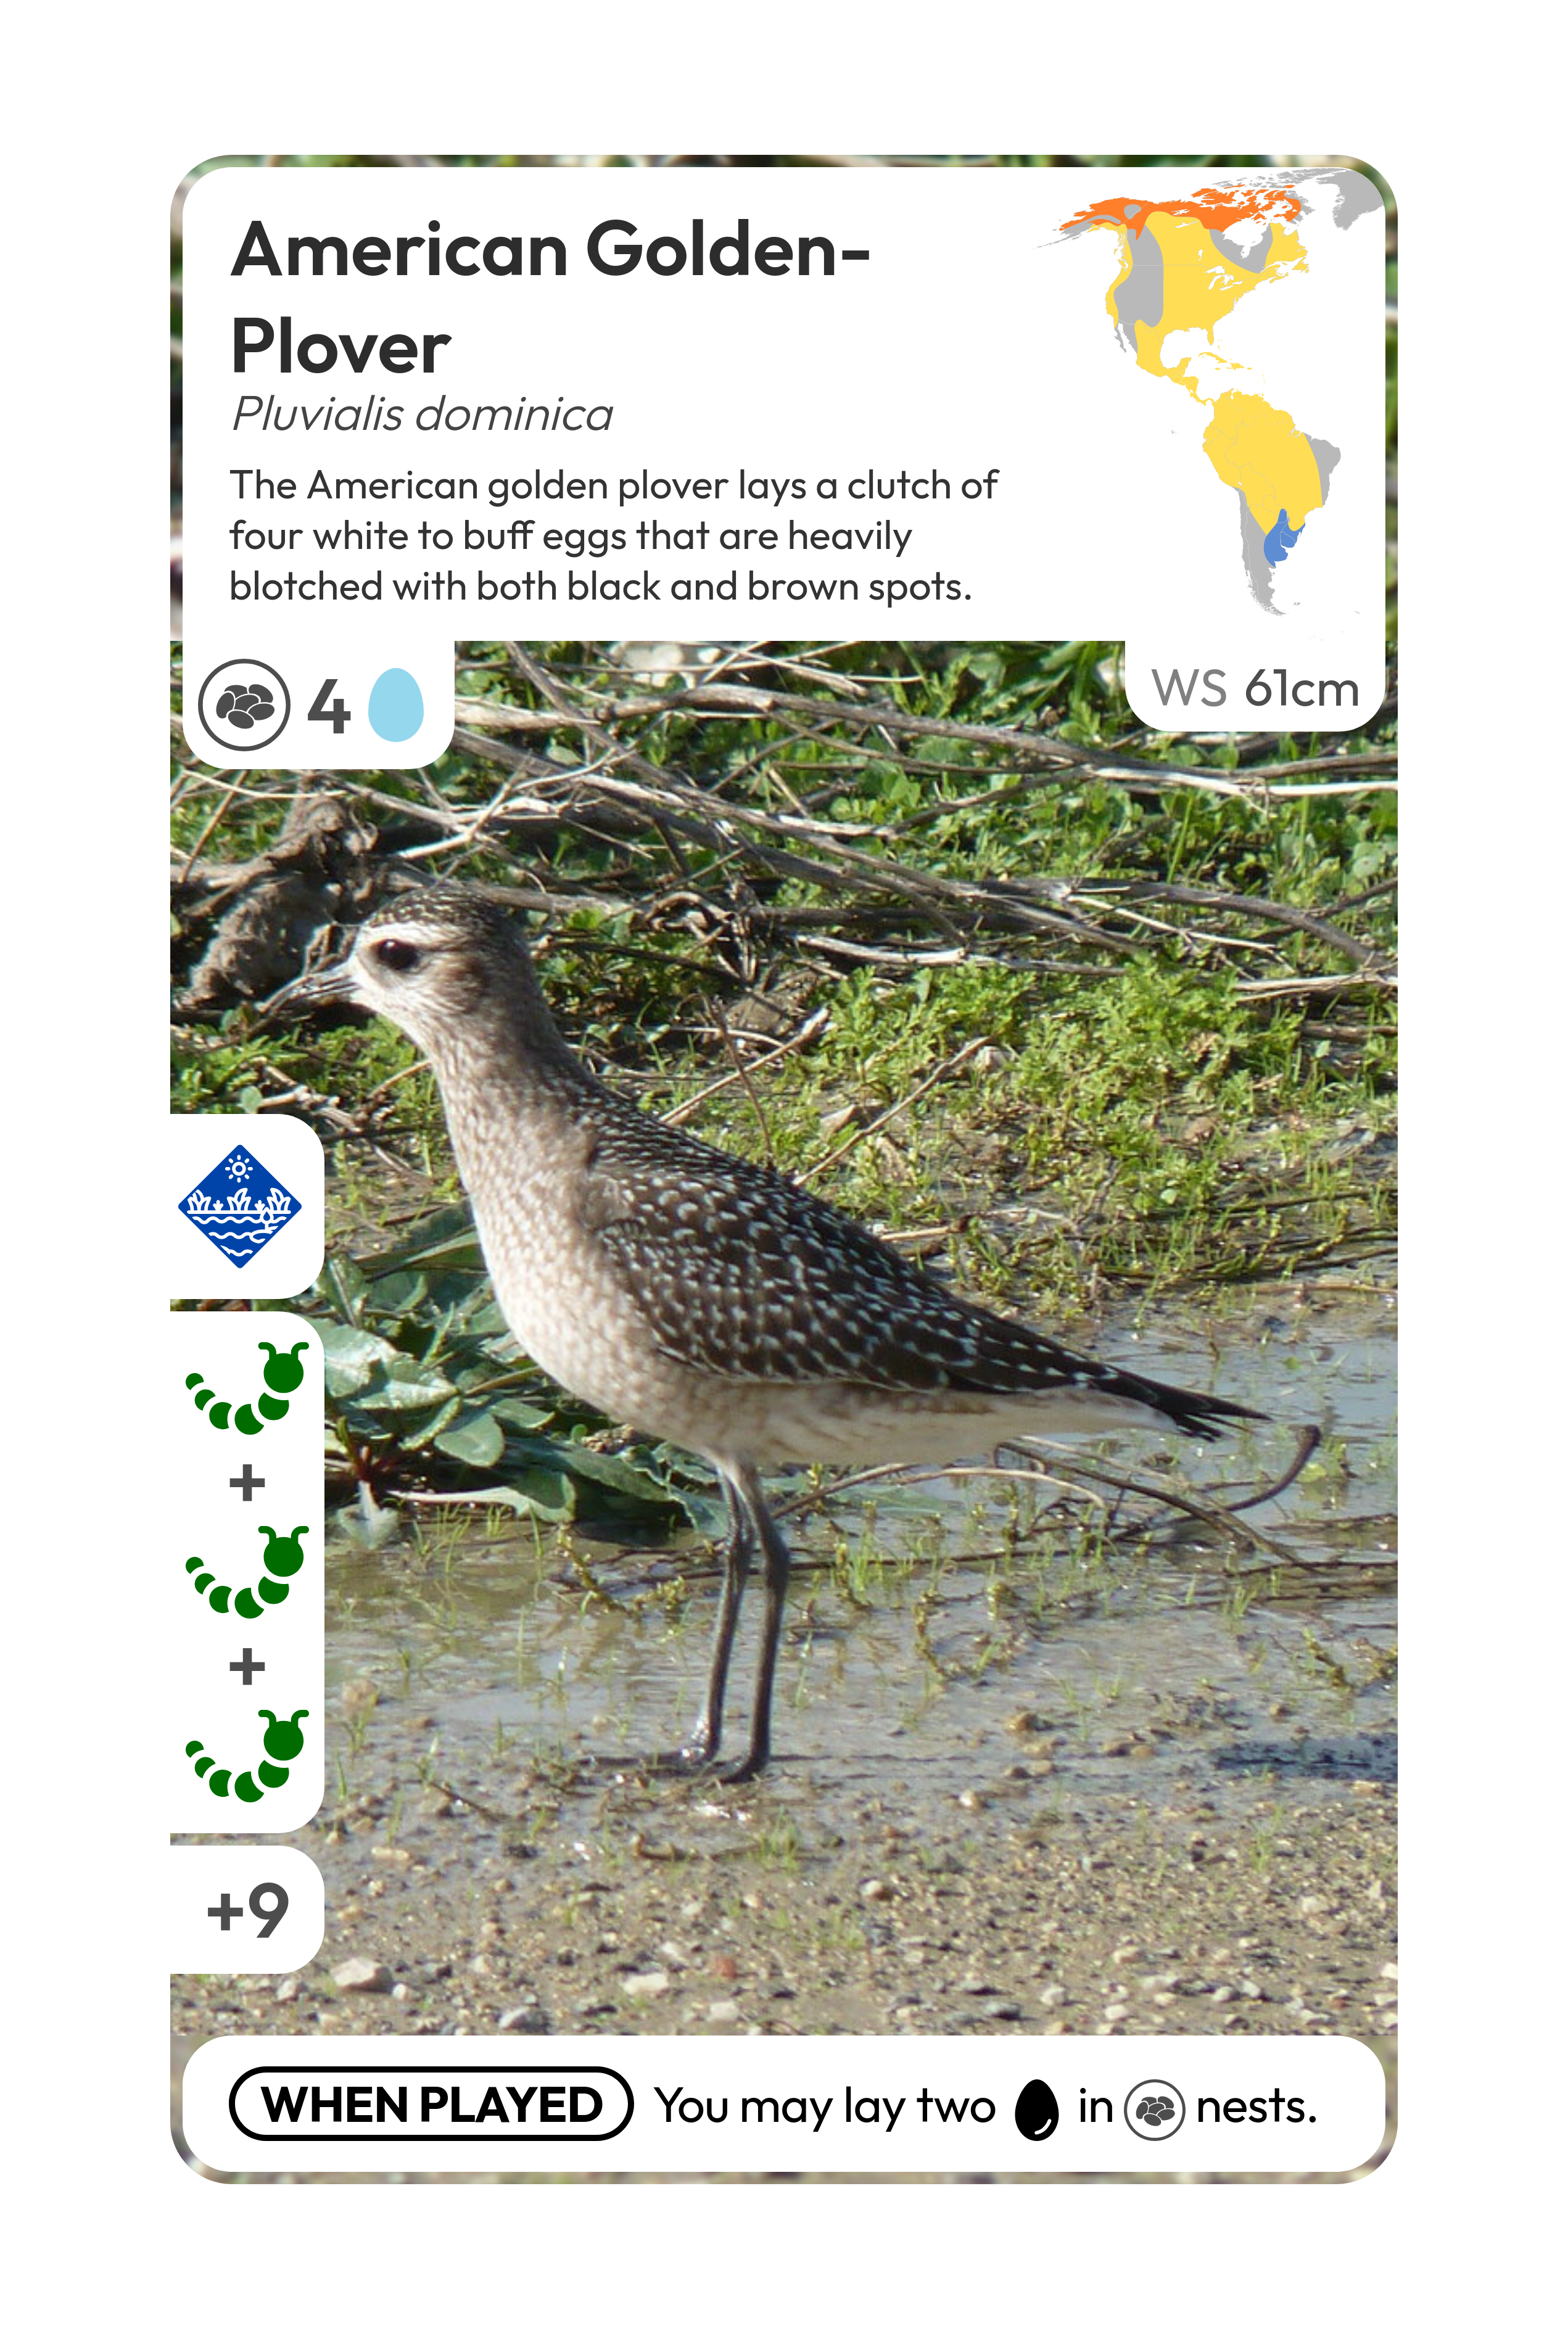 A card of an American Golden Plover, generated by the first generation of my code.